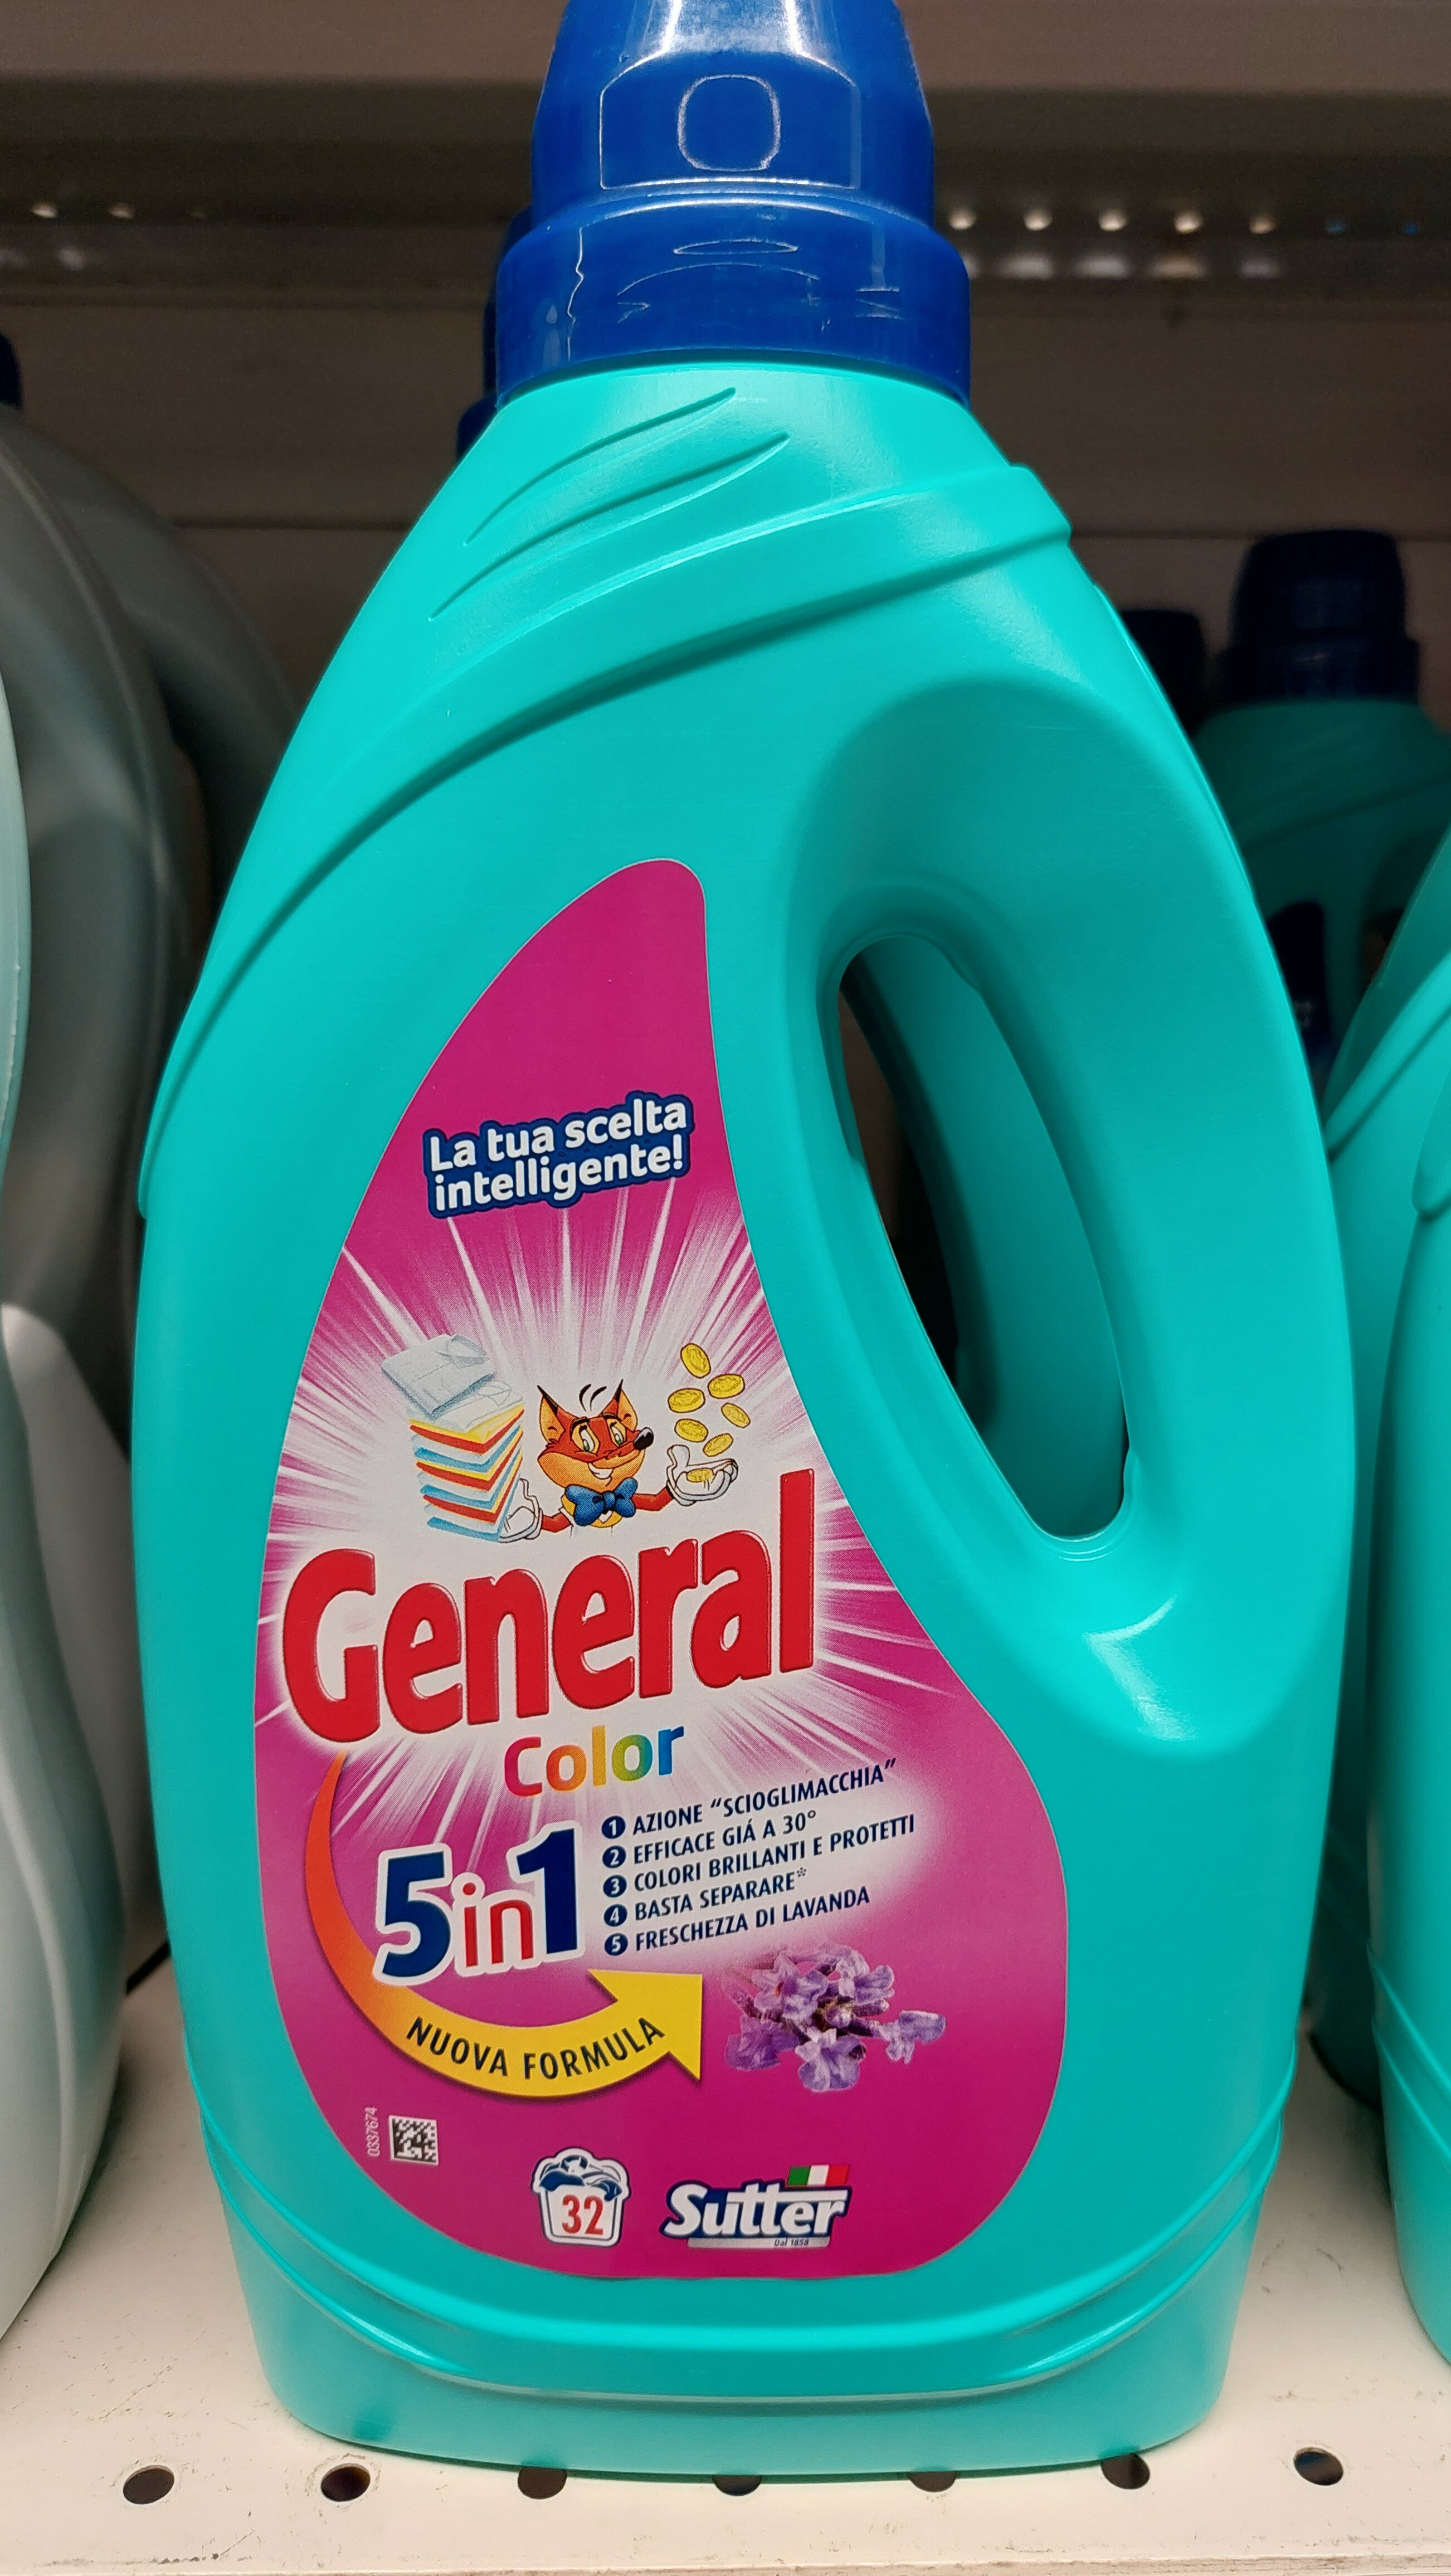 General color - Product - it